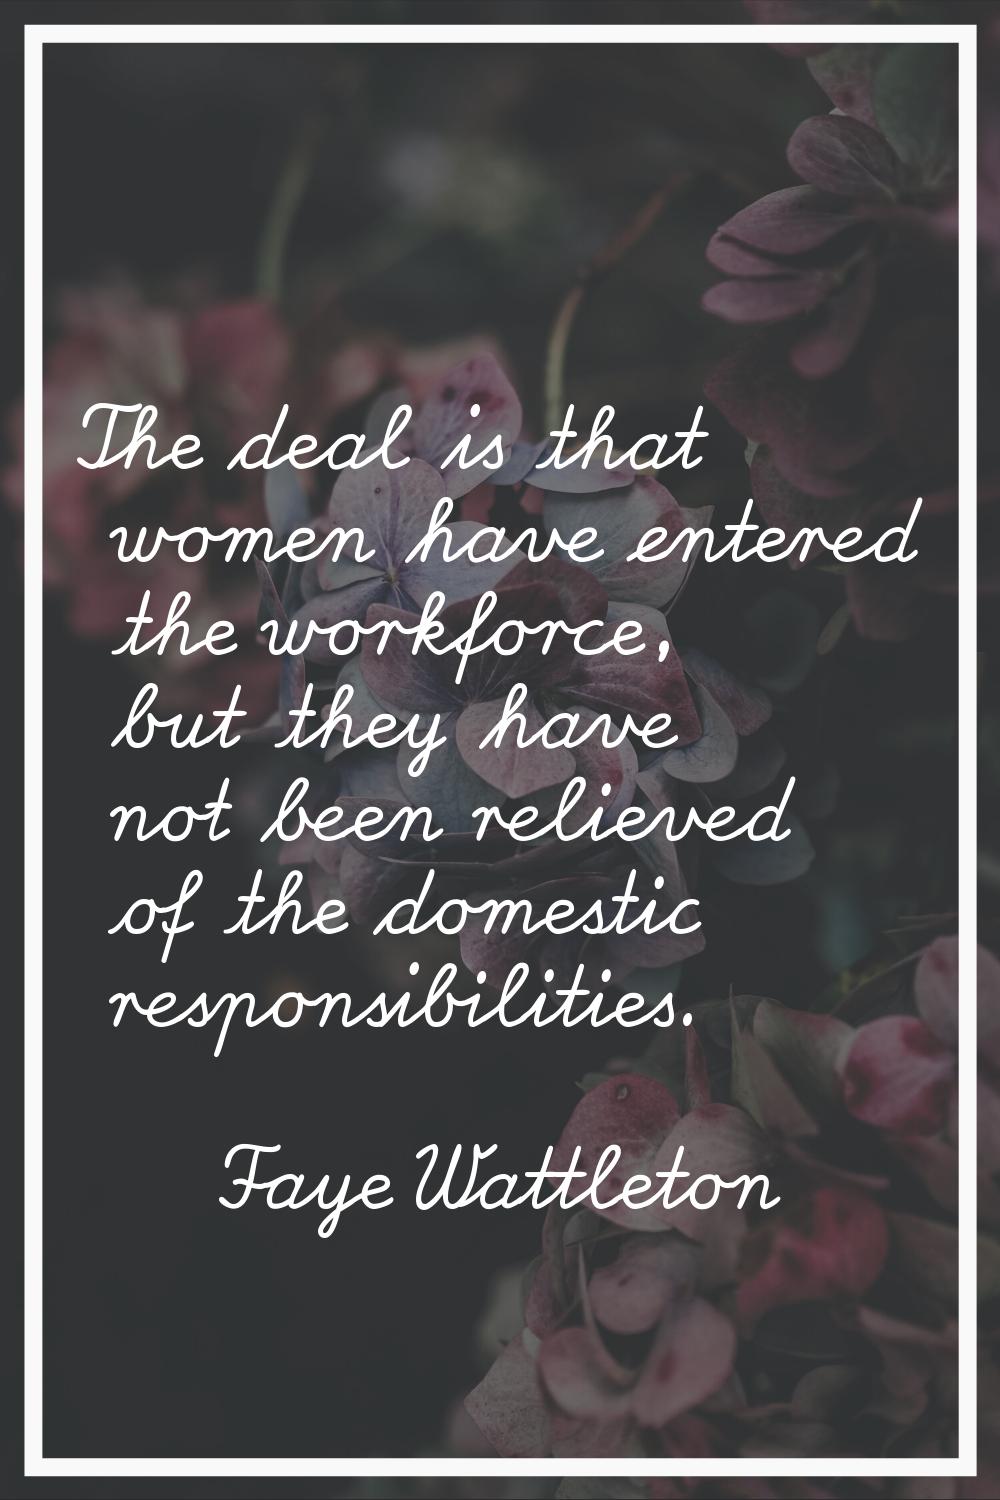 The deal is that women have entered the workforce, but they have not been relieved of the domestic 